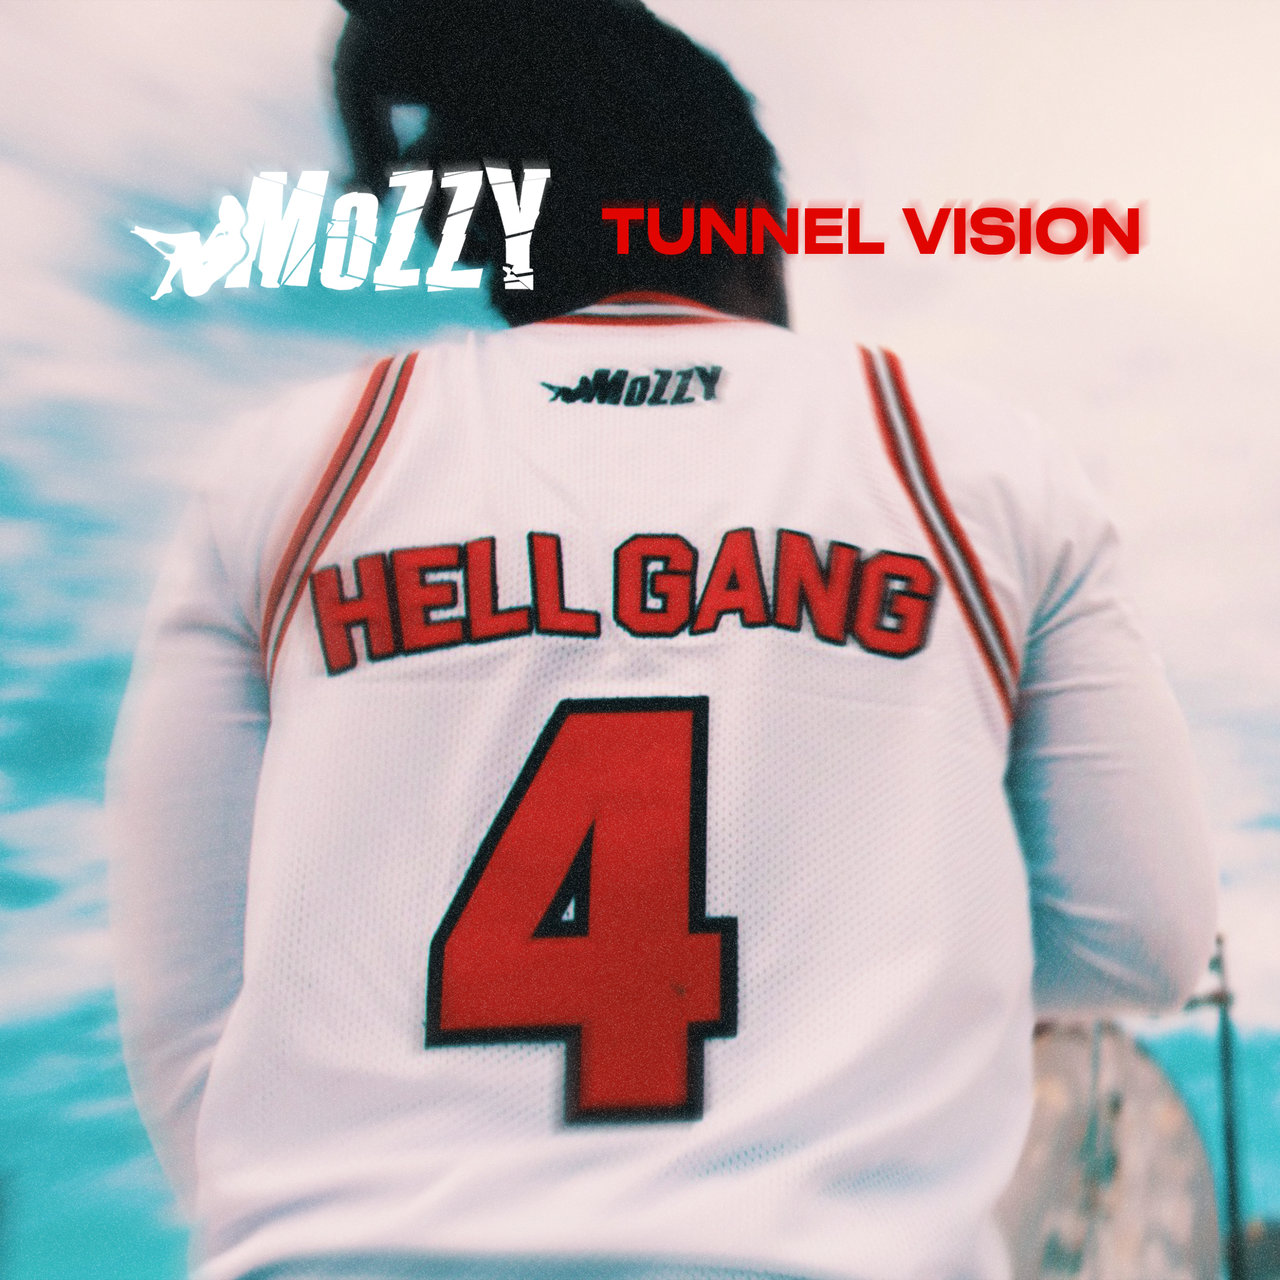 Mozzy - Tunnel Vision (Cover)